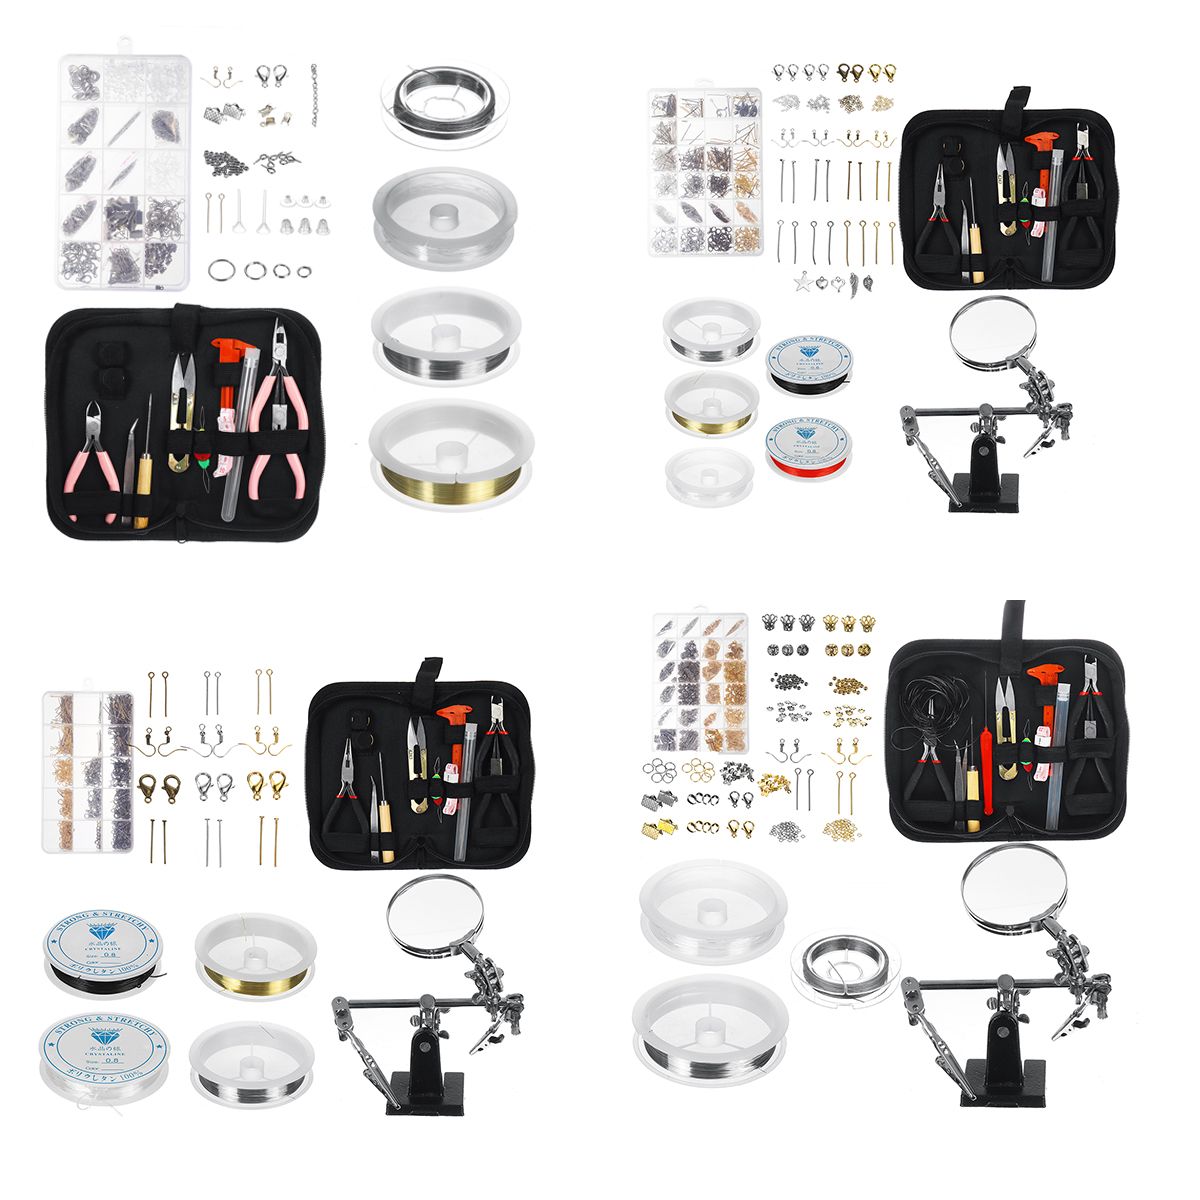 Mixed-Jewelry-Making-Supplies-Tools-Kit-Set-Wires-Beads-1072112614972028Pcs-1721205